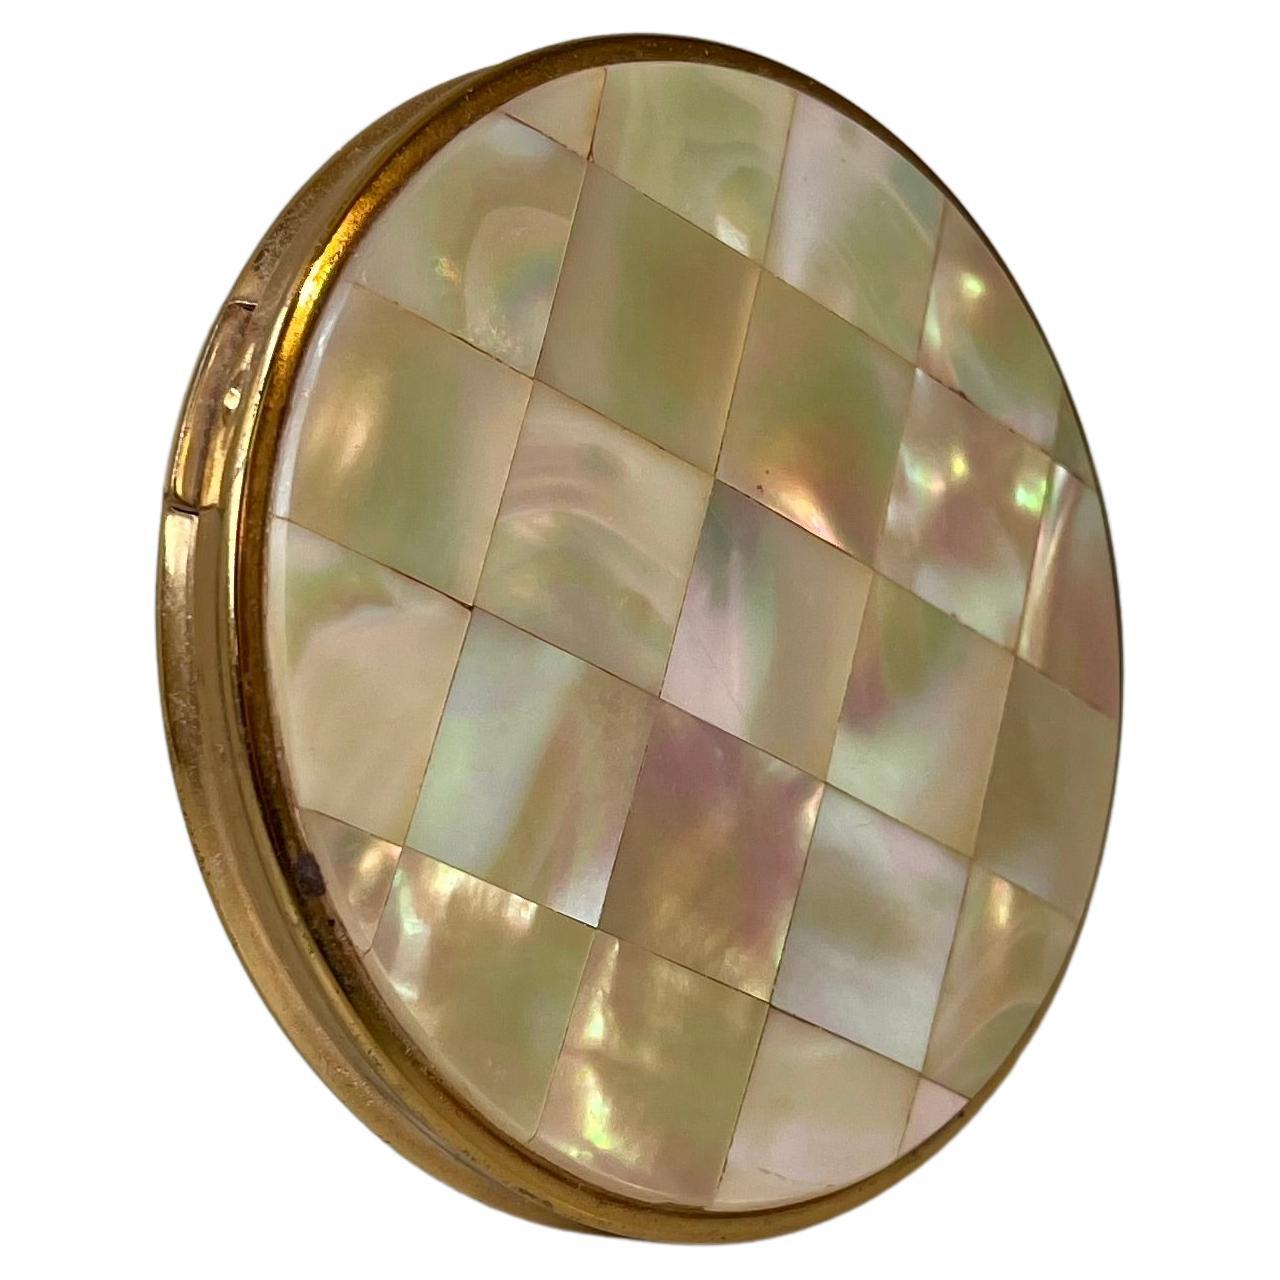 Vintage Swiss Powder Compact in Mother of Pearl & Gold Plating